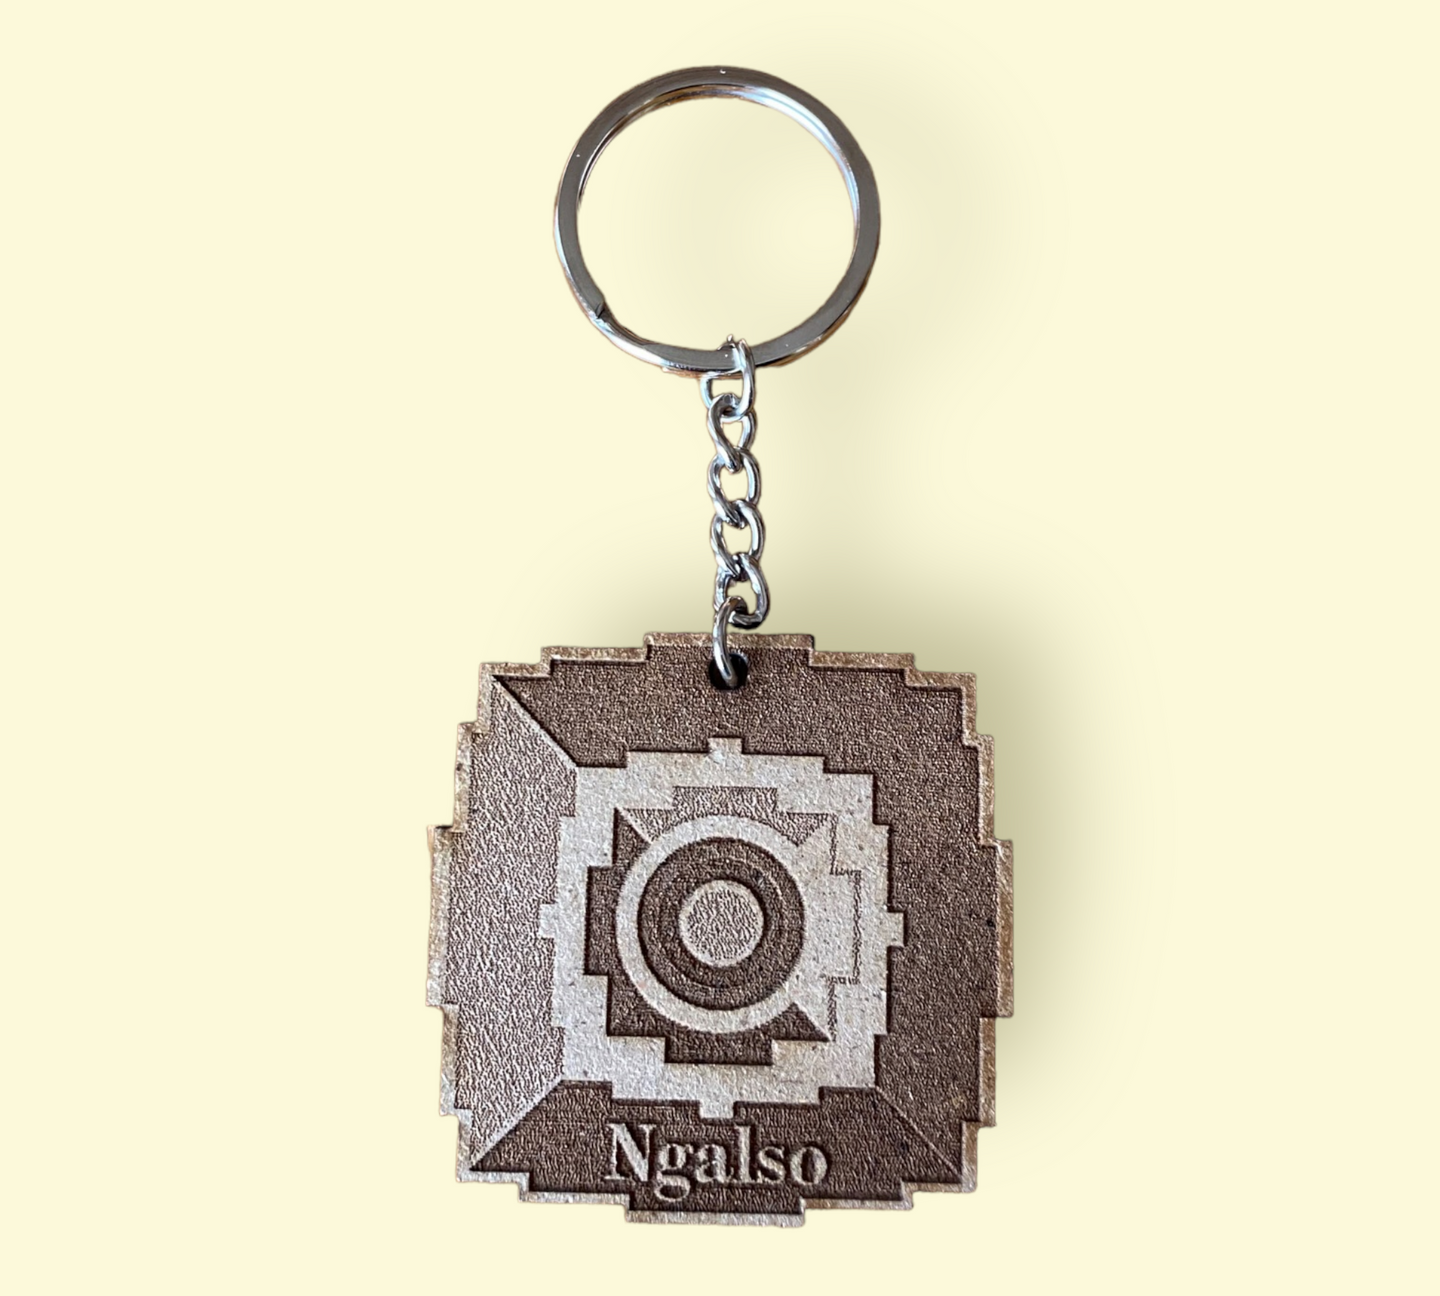 NgalSo engraved wooden keyring